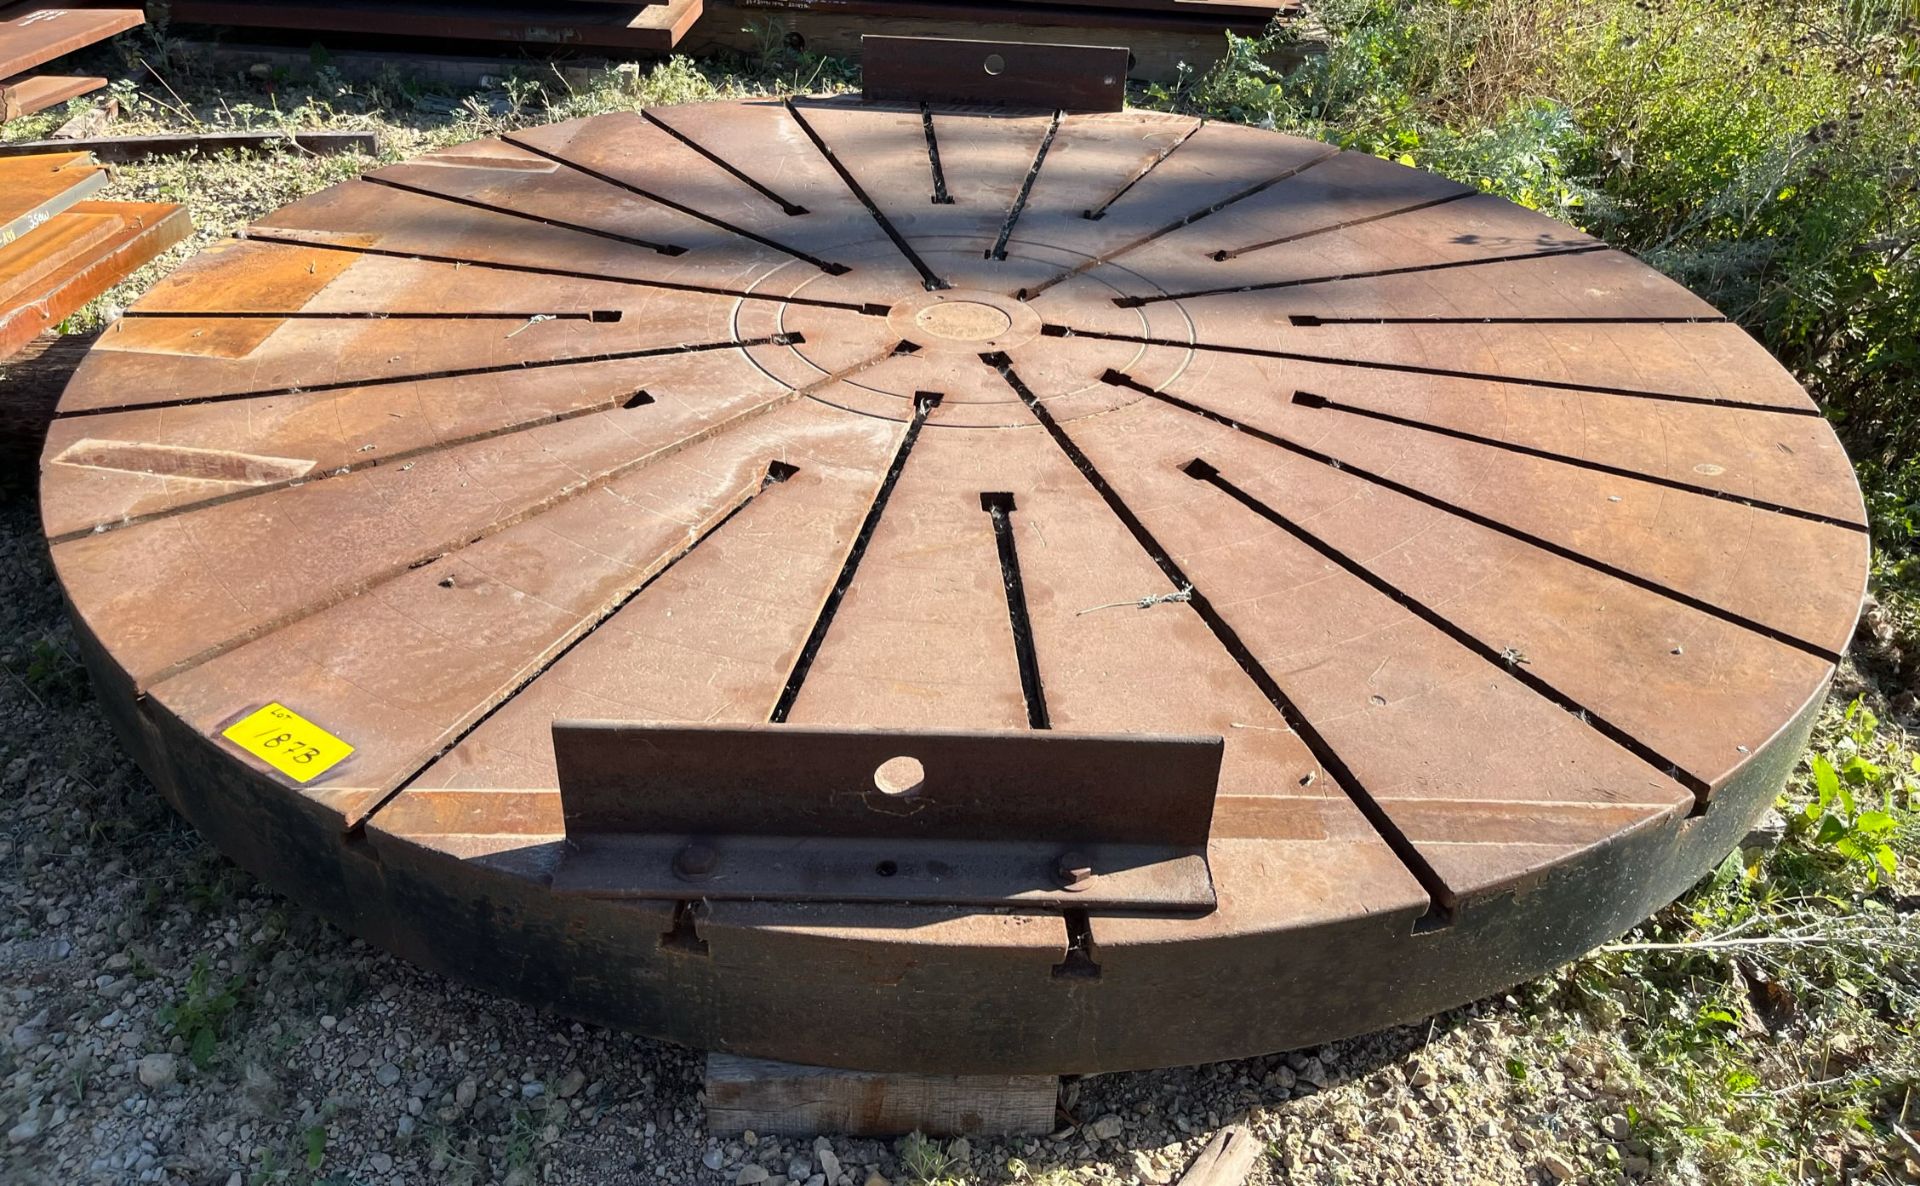 144" DIA X 9.5"H CIRCULAR MACHINING BED [RIGGING FEES FOR LOT #187B - $200 USD PLUS APPLICABLE